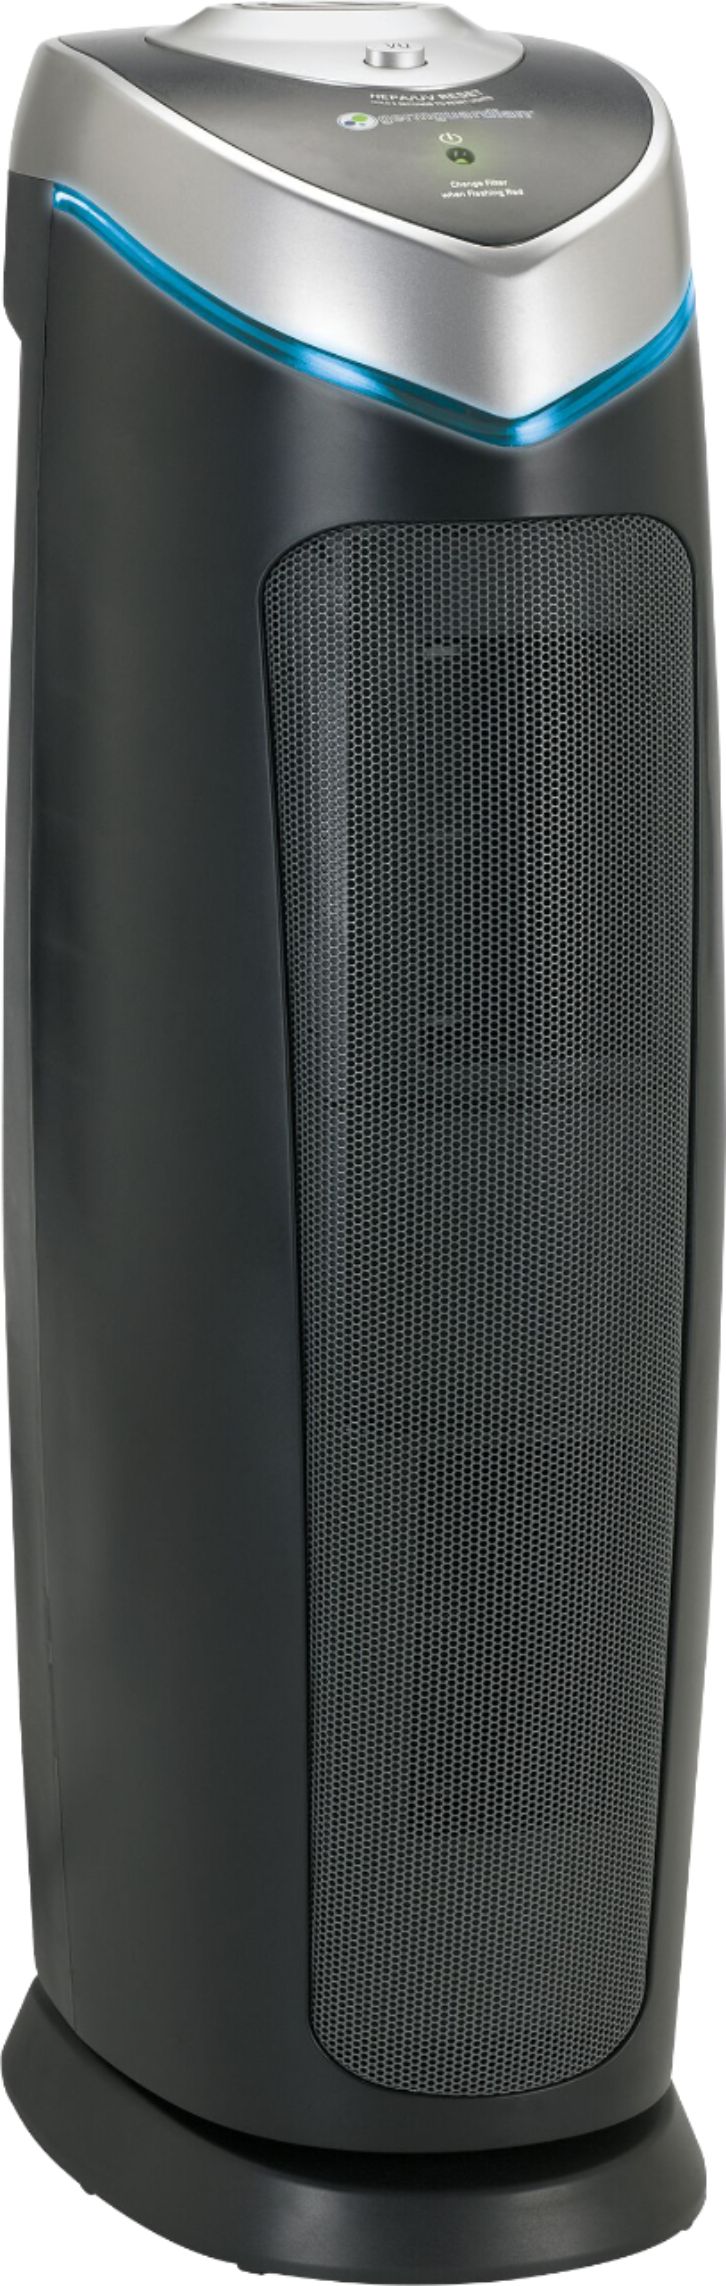 GermGuardian AC4825DLX 4-in-1 Air Purifier with HEPA Filter, UV-C Sanitizer  and Odor Reduction, 22-Inch Tower – GuardianTechnologies